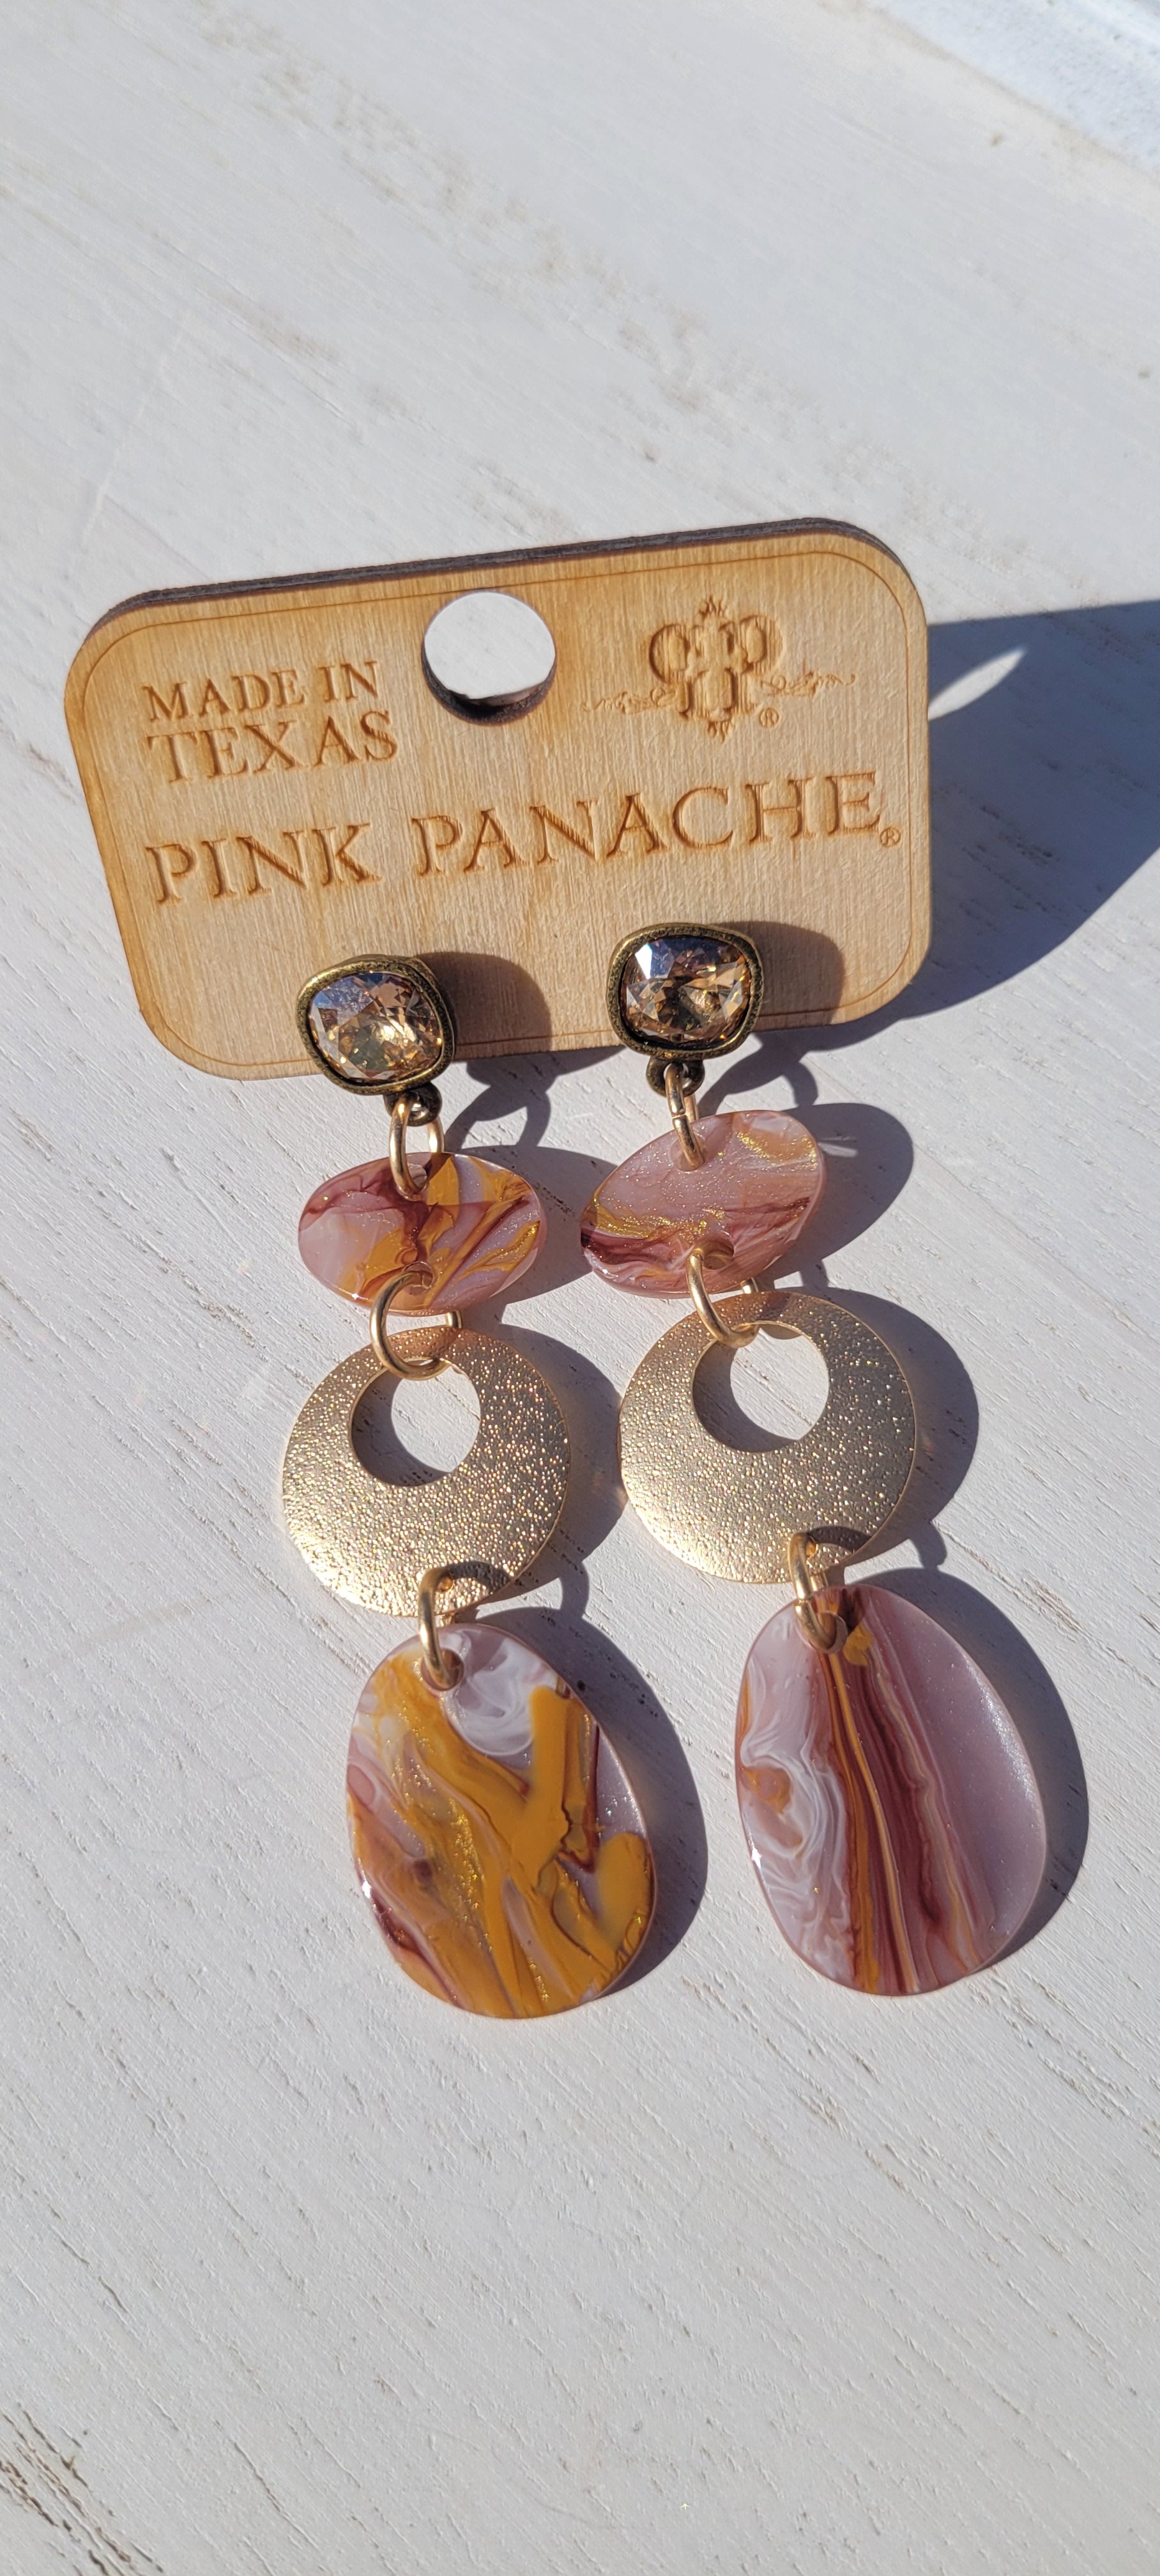 Pink Panache Earrings Color: 8mm bronze/golden shadow cushion cut post with brown acrylic swirl and gold circle triple drop earring Limited supply! 